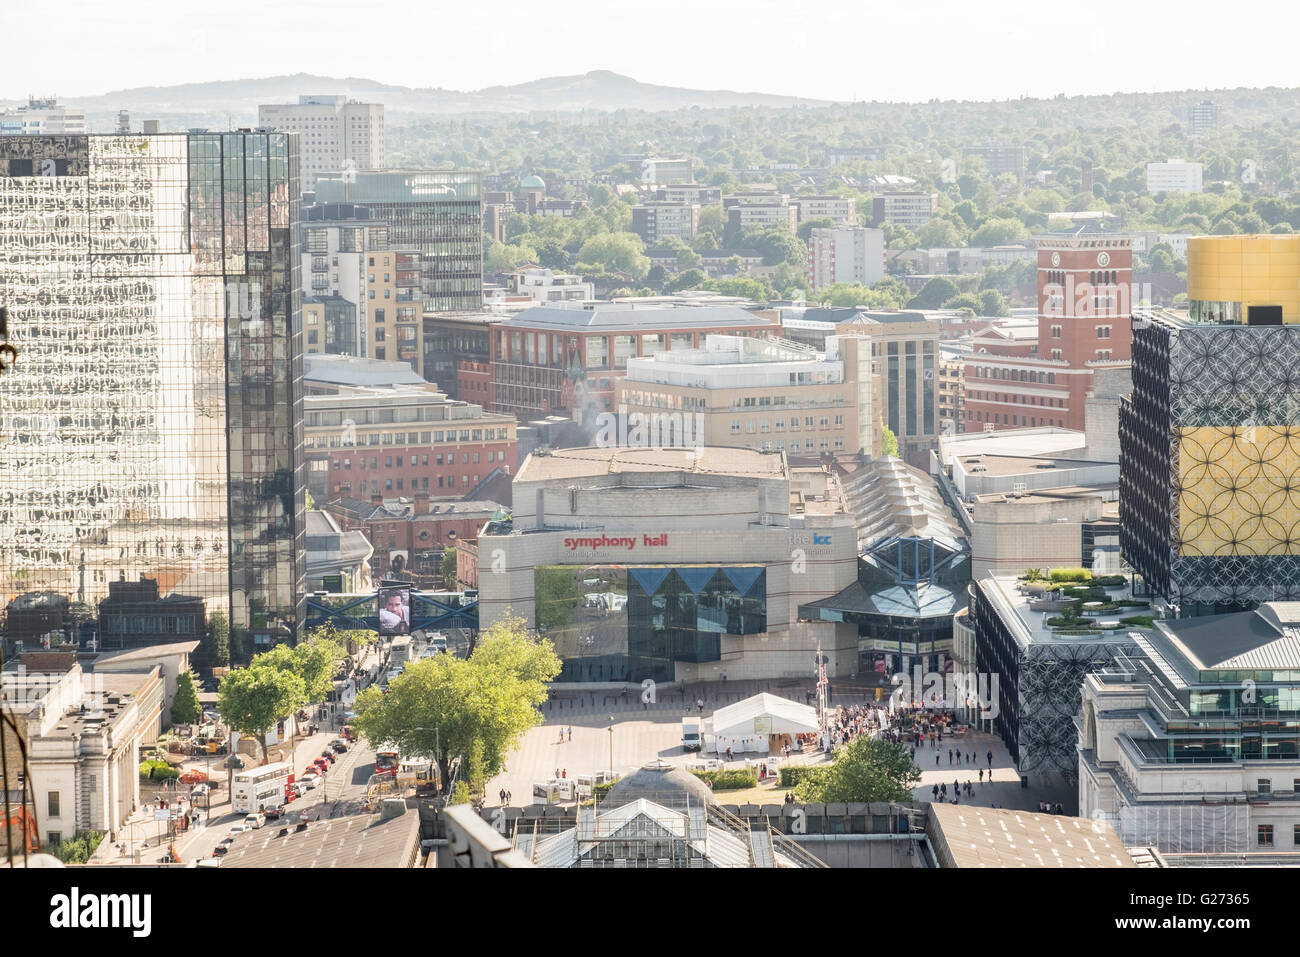 Aerial photograph of Birmingham City Centre, England. Symphony Hall and the ICC in Centenary Square. Stock Photo